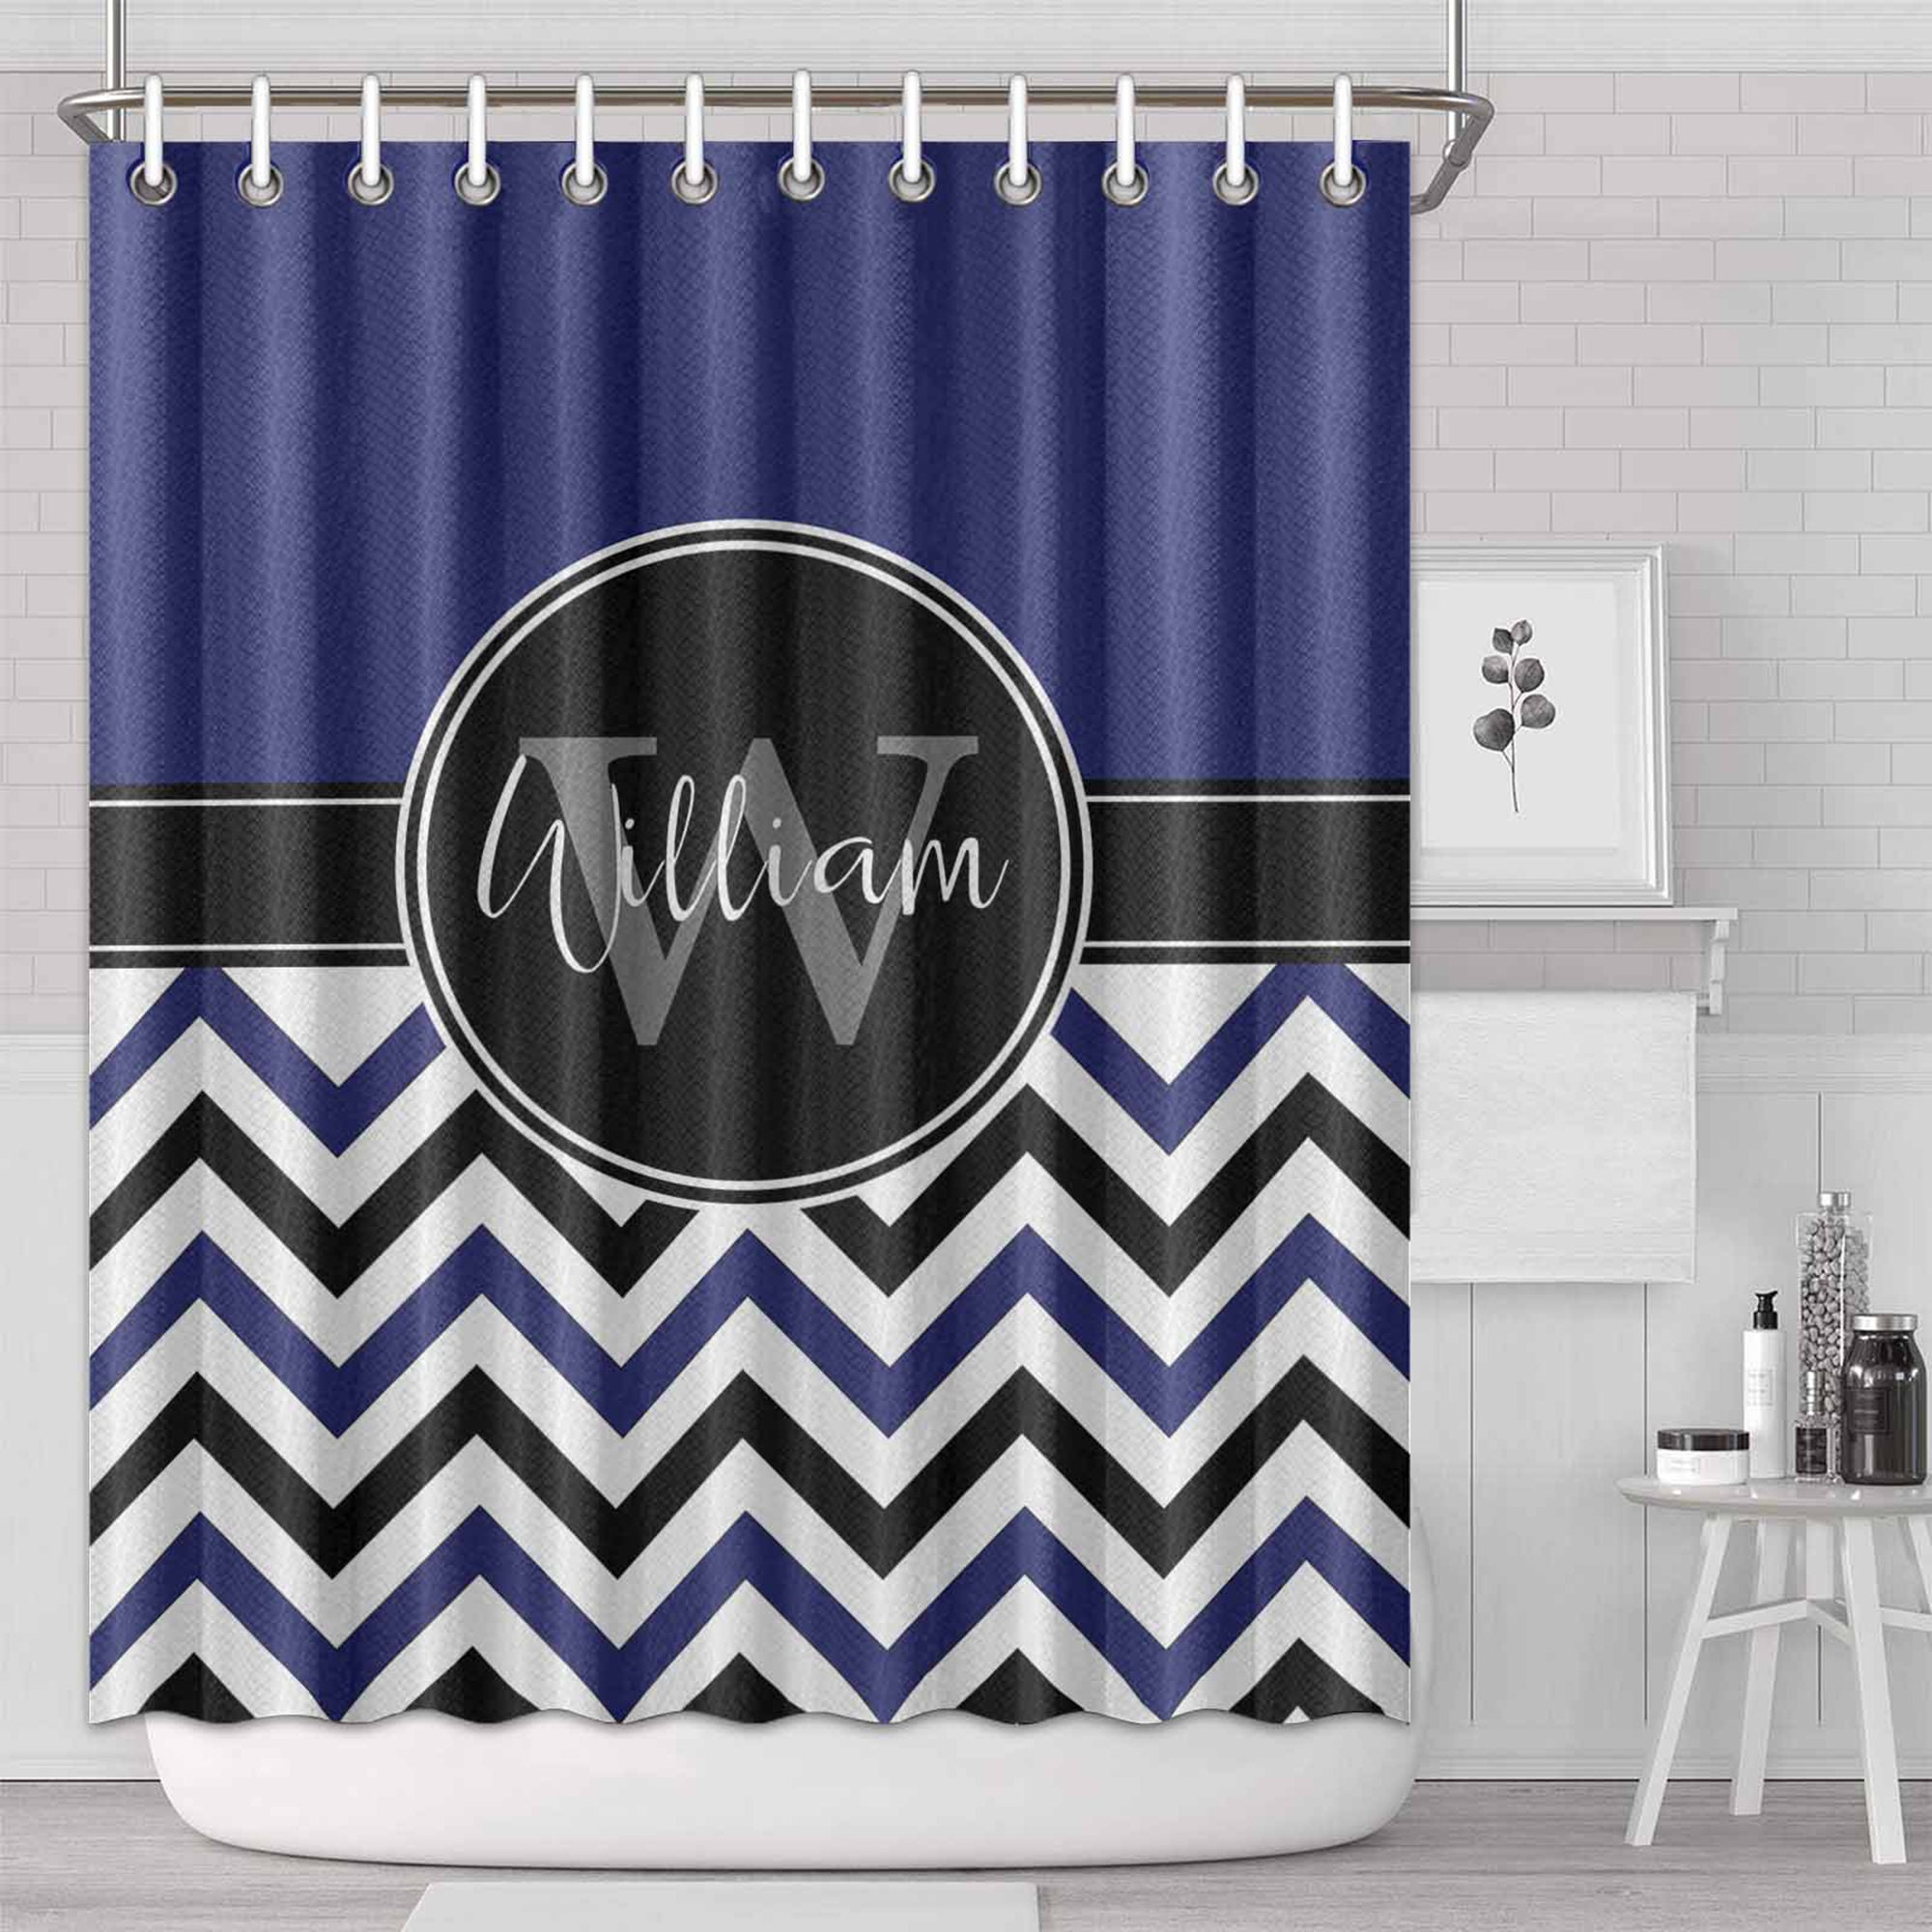 Abstract Modern Fabric Shower Curtain for Bathroom Gibelle Long Shower Curtain 72 x 78 Cool Glass Texture Ombre Shower Curtain with Hooks Tall Black Grey Shower Curtain Set 